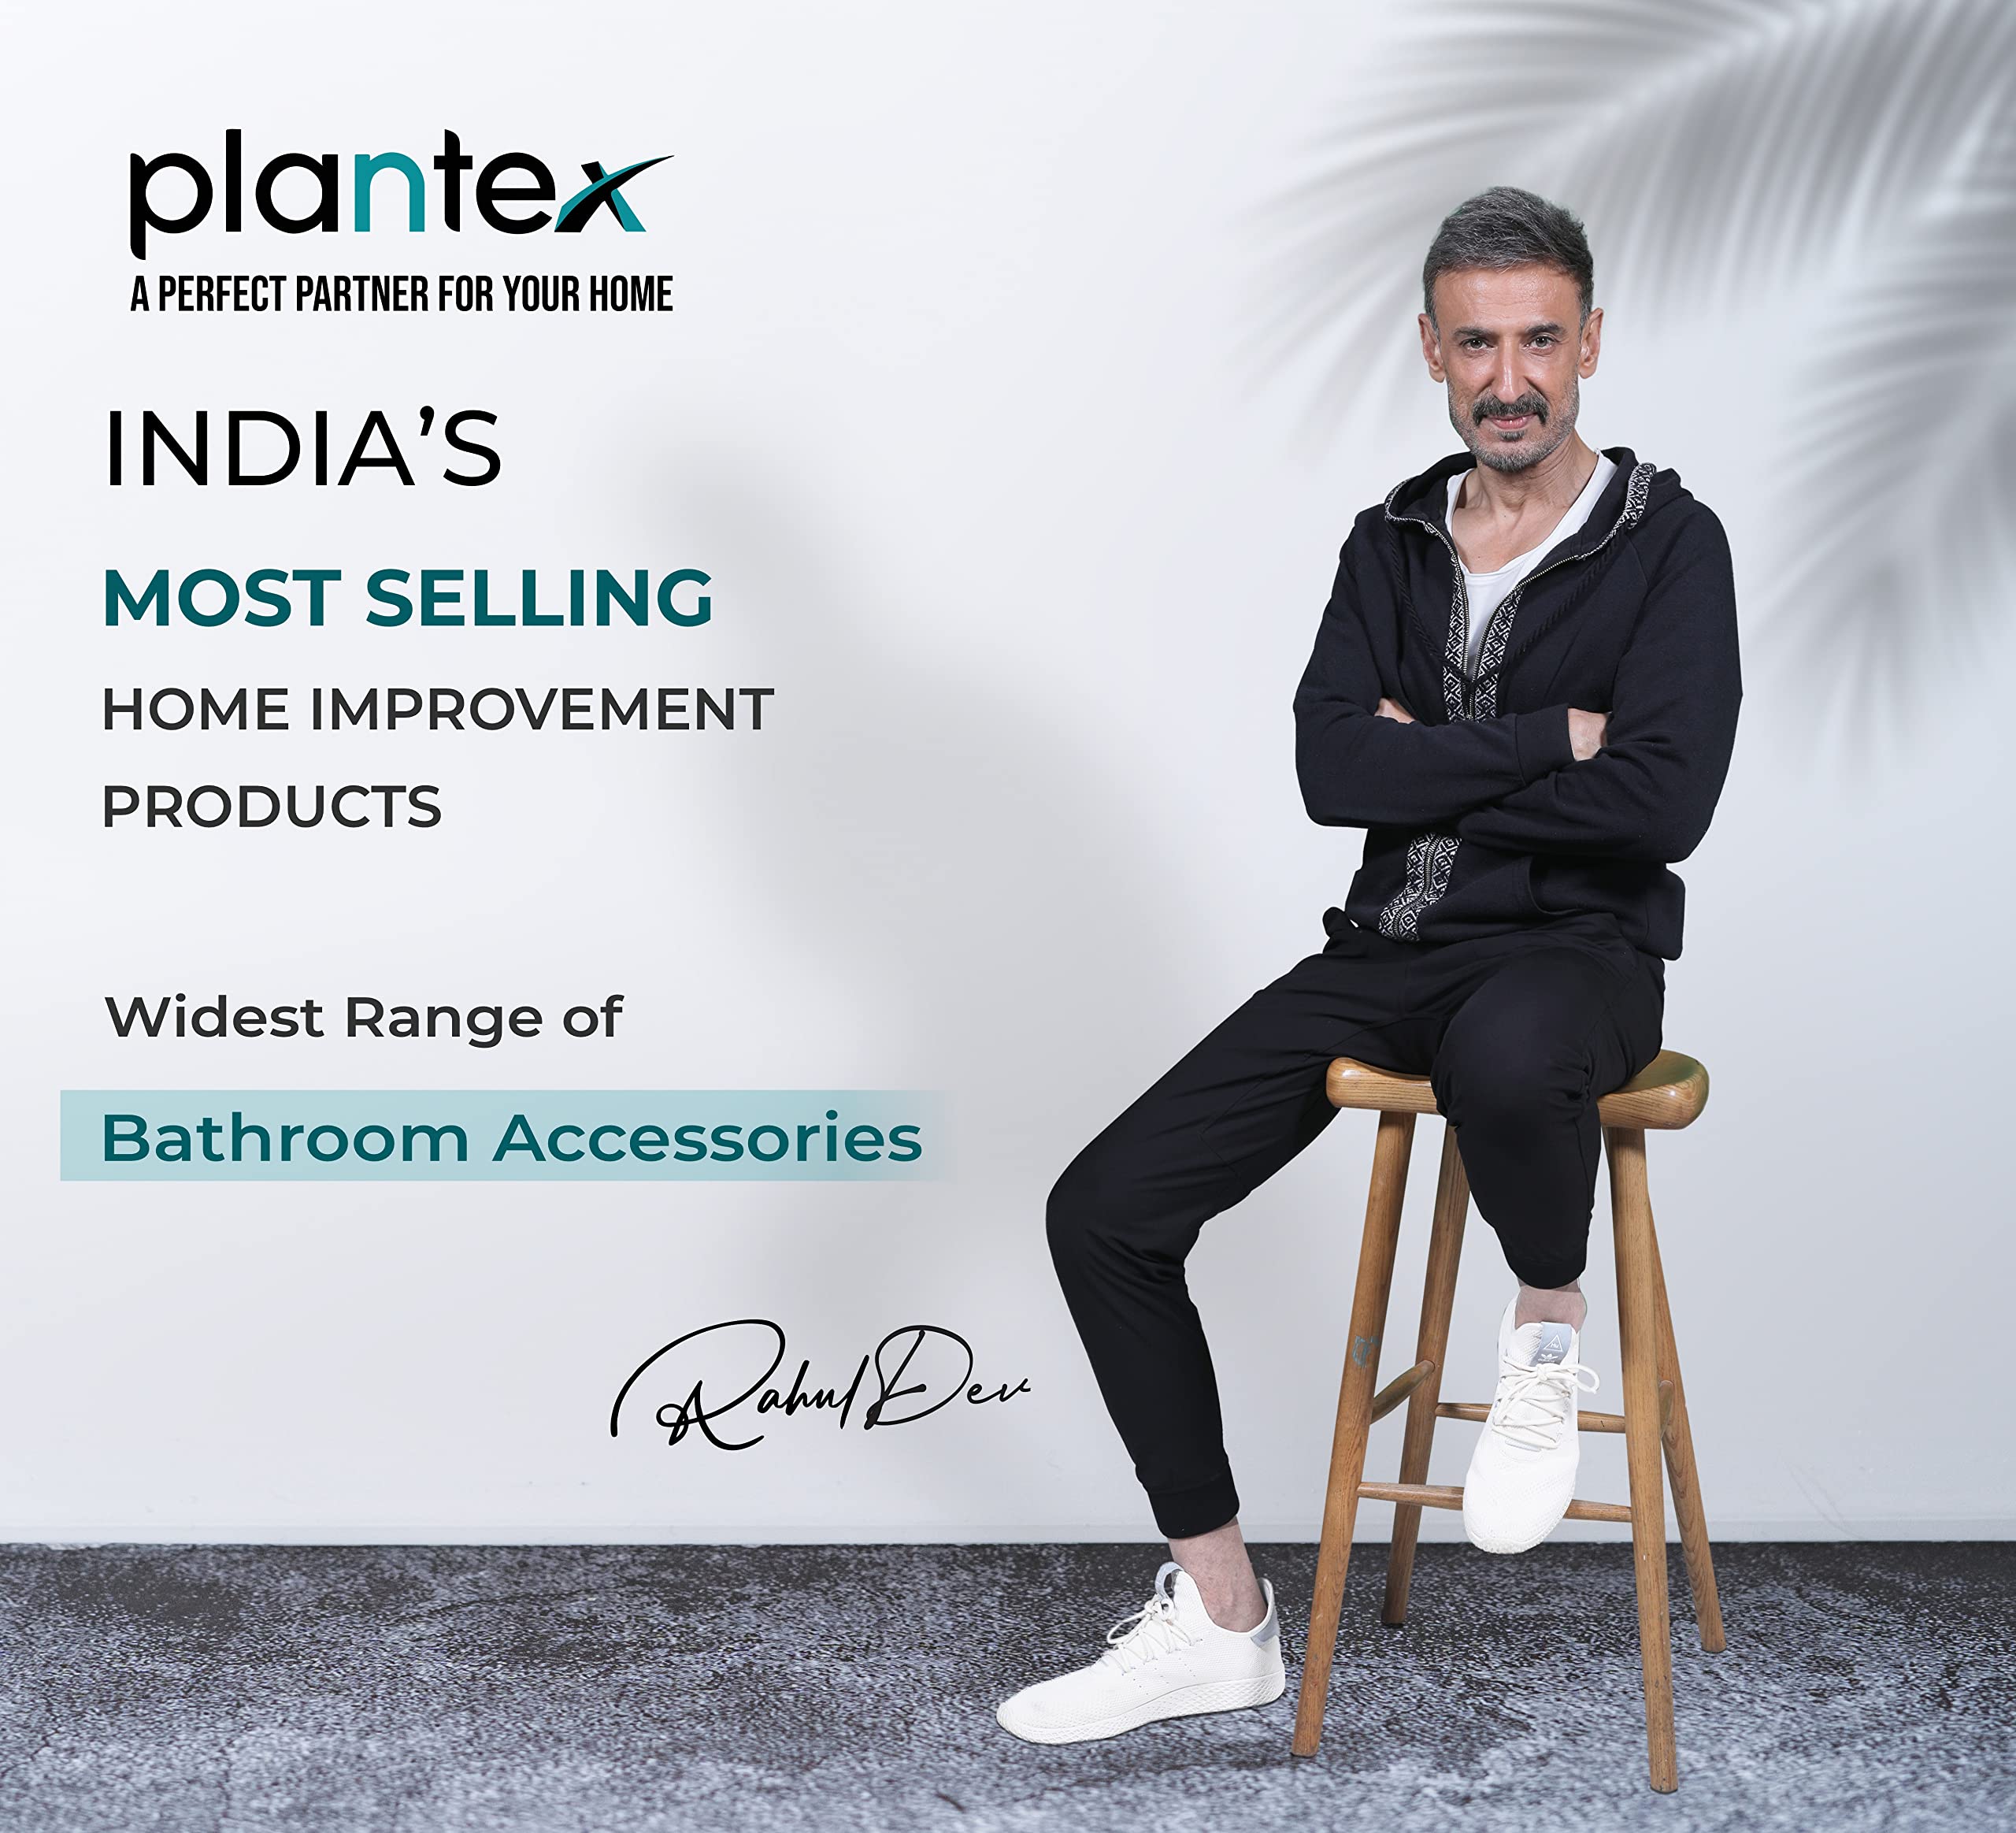 Plantex Stainless Steel 2in1 Multipurpose Bathroom Rack/Shelf with soap Dish/Holder - Multipurpose - Bathroom Accessories (15x5 Inches) – Pack of 3